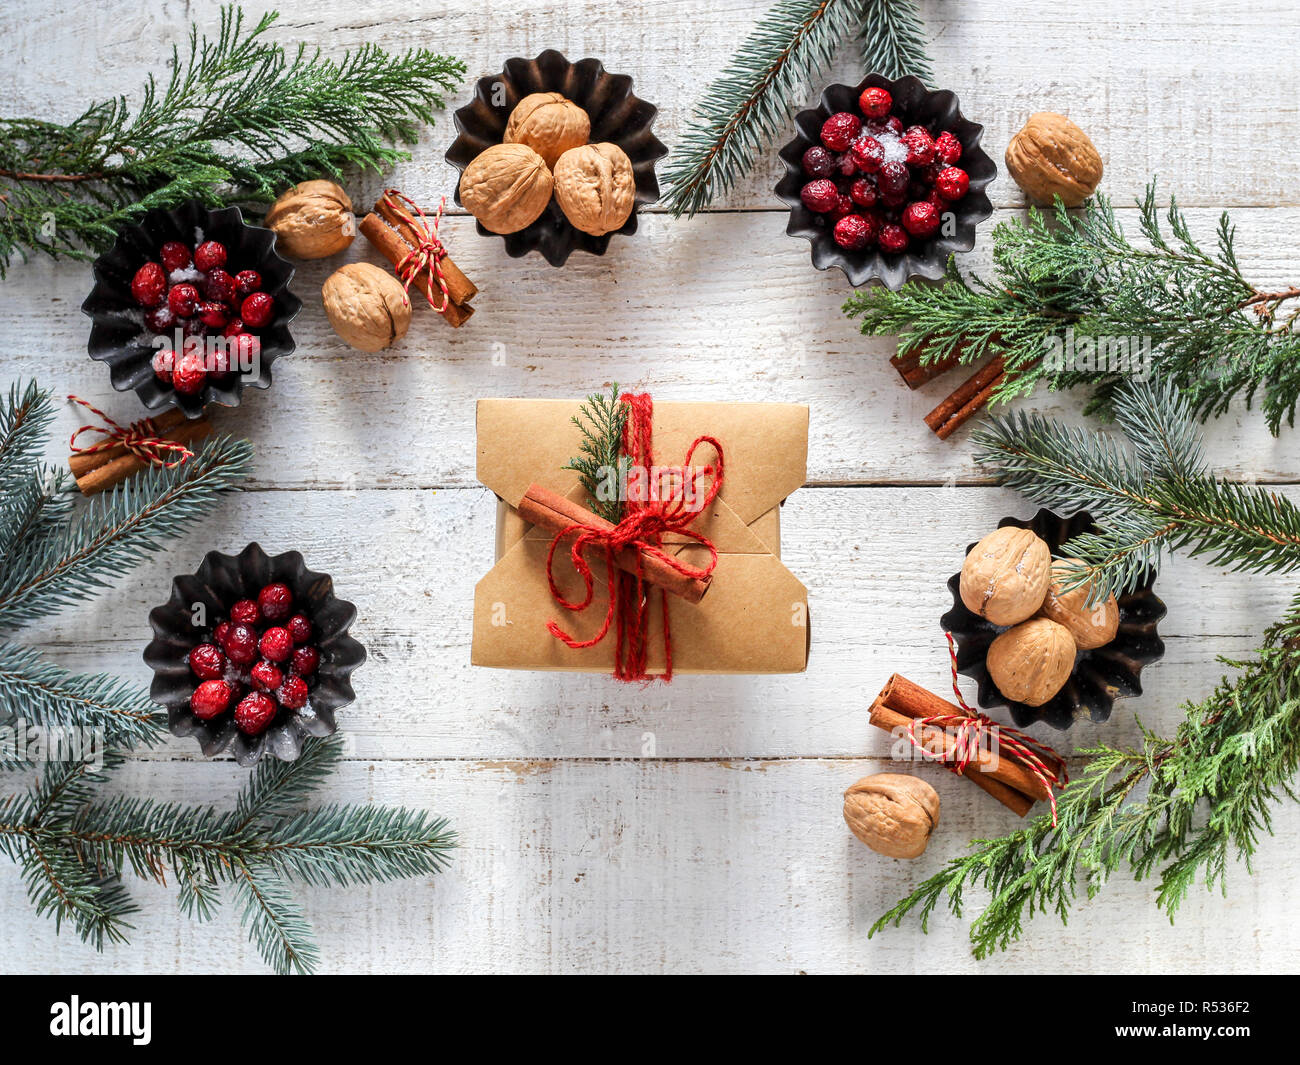 Festive mood flat lay with a gift box in the middle surrounded by evergreens, red berries, nuts and cinnamon sticks on a white wooden background Stock Photo